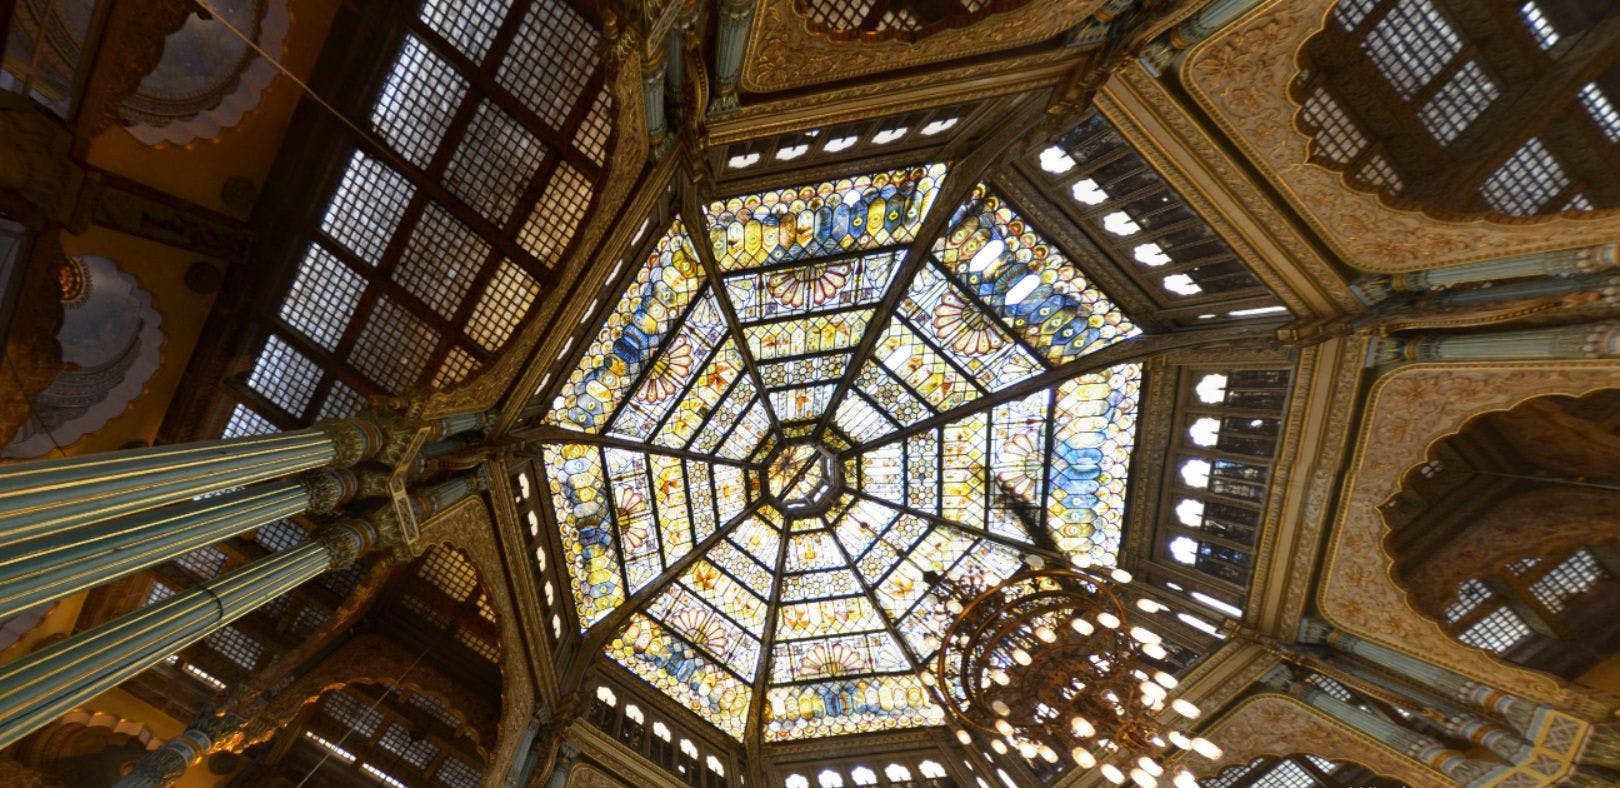 The stained glass ceiling of the Kalyana Mandapa